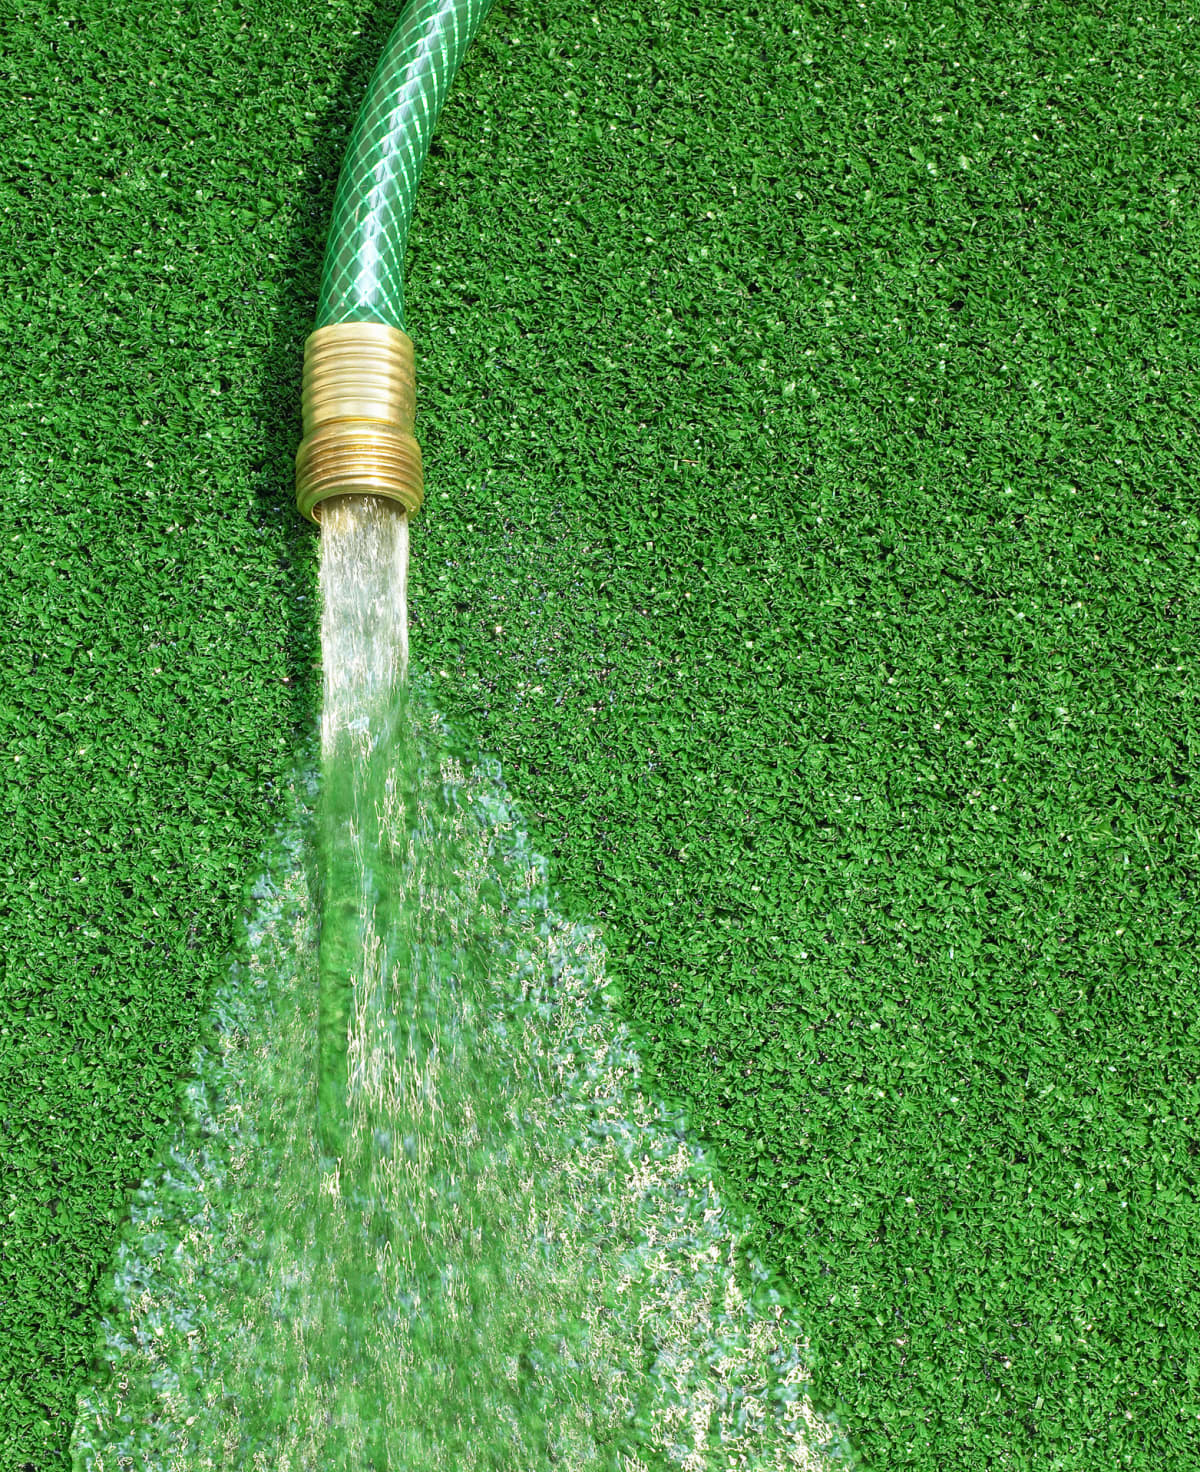 Hose with running water on artificial grass